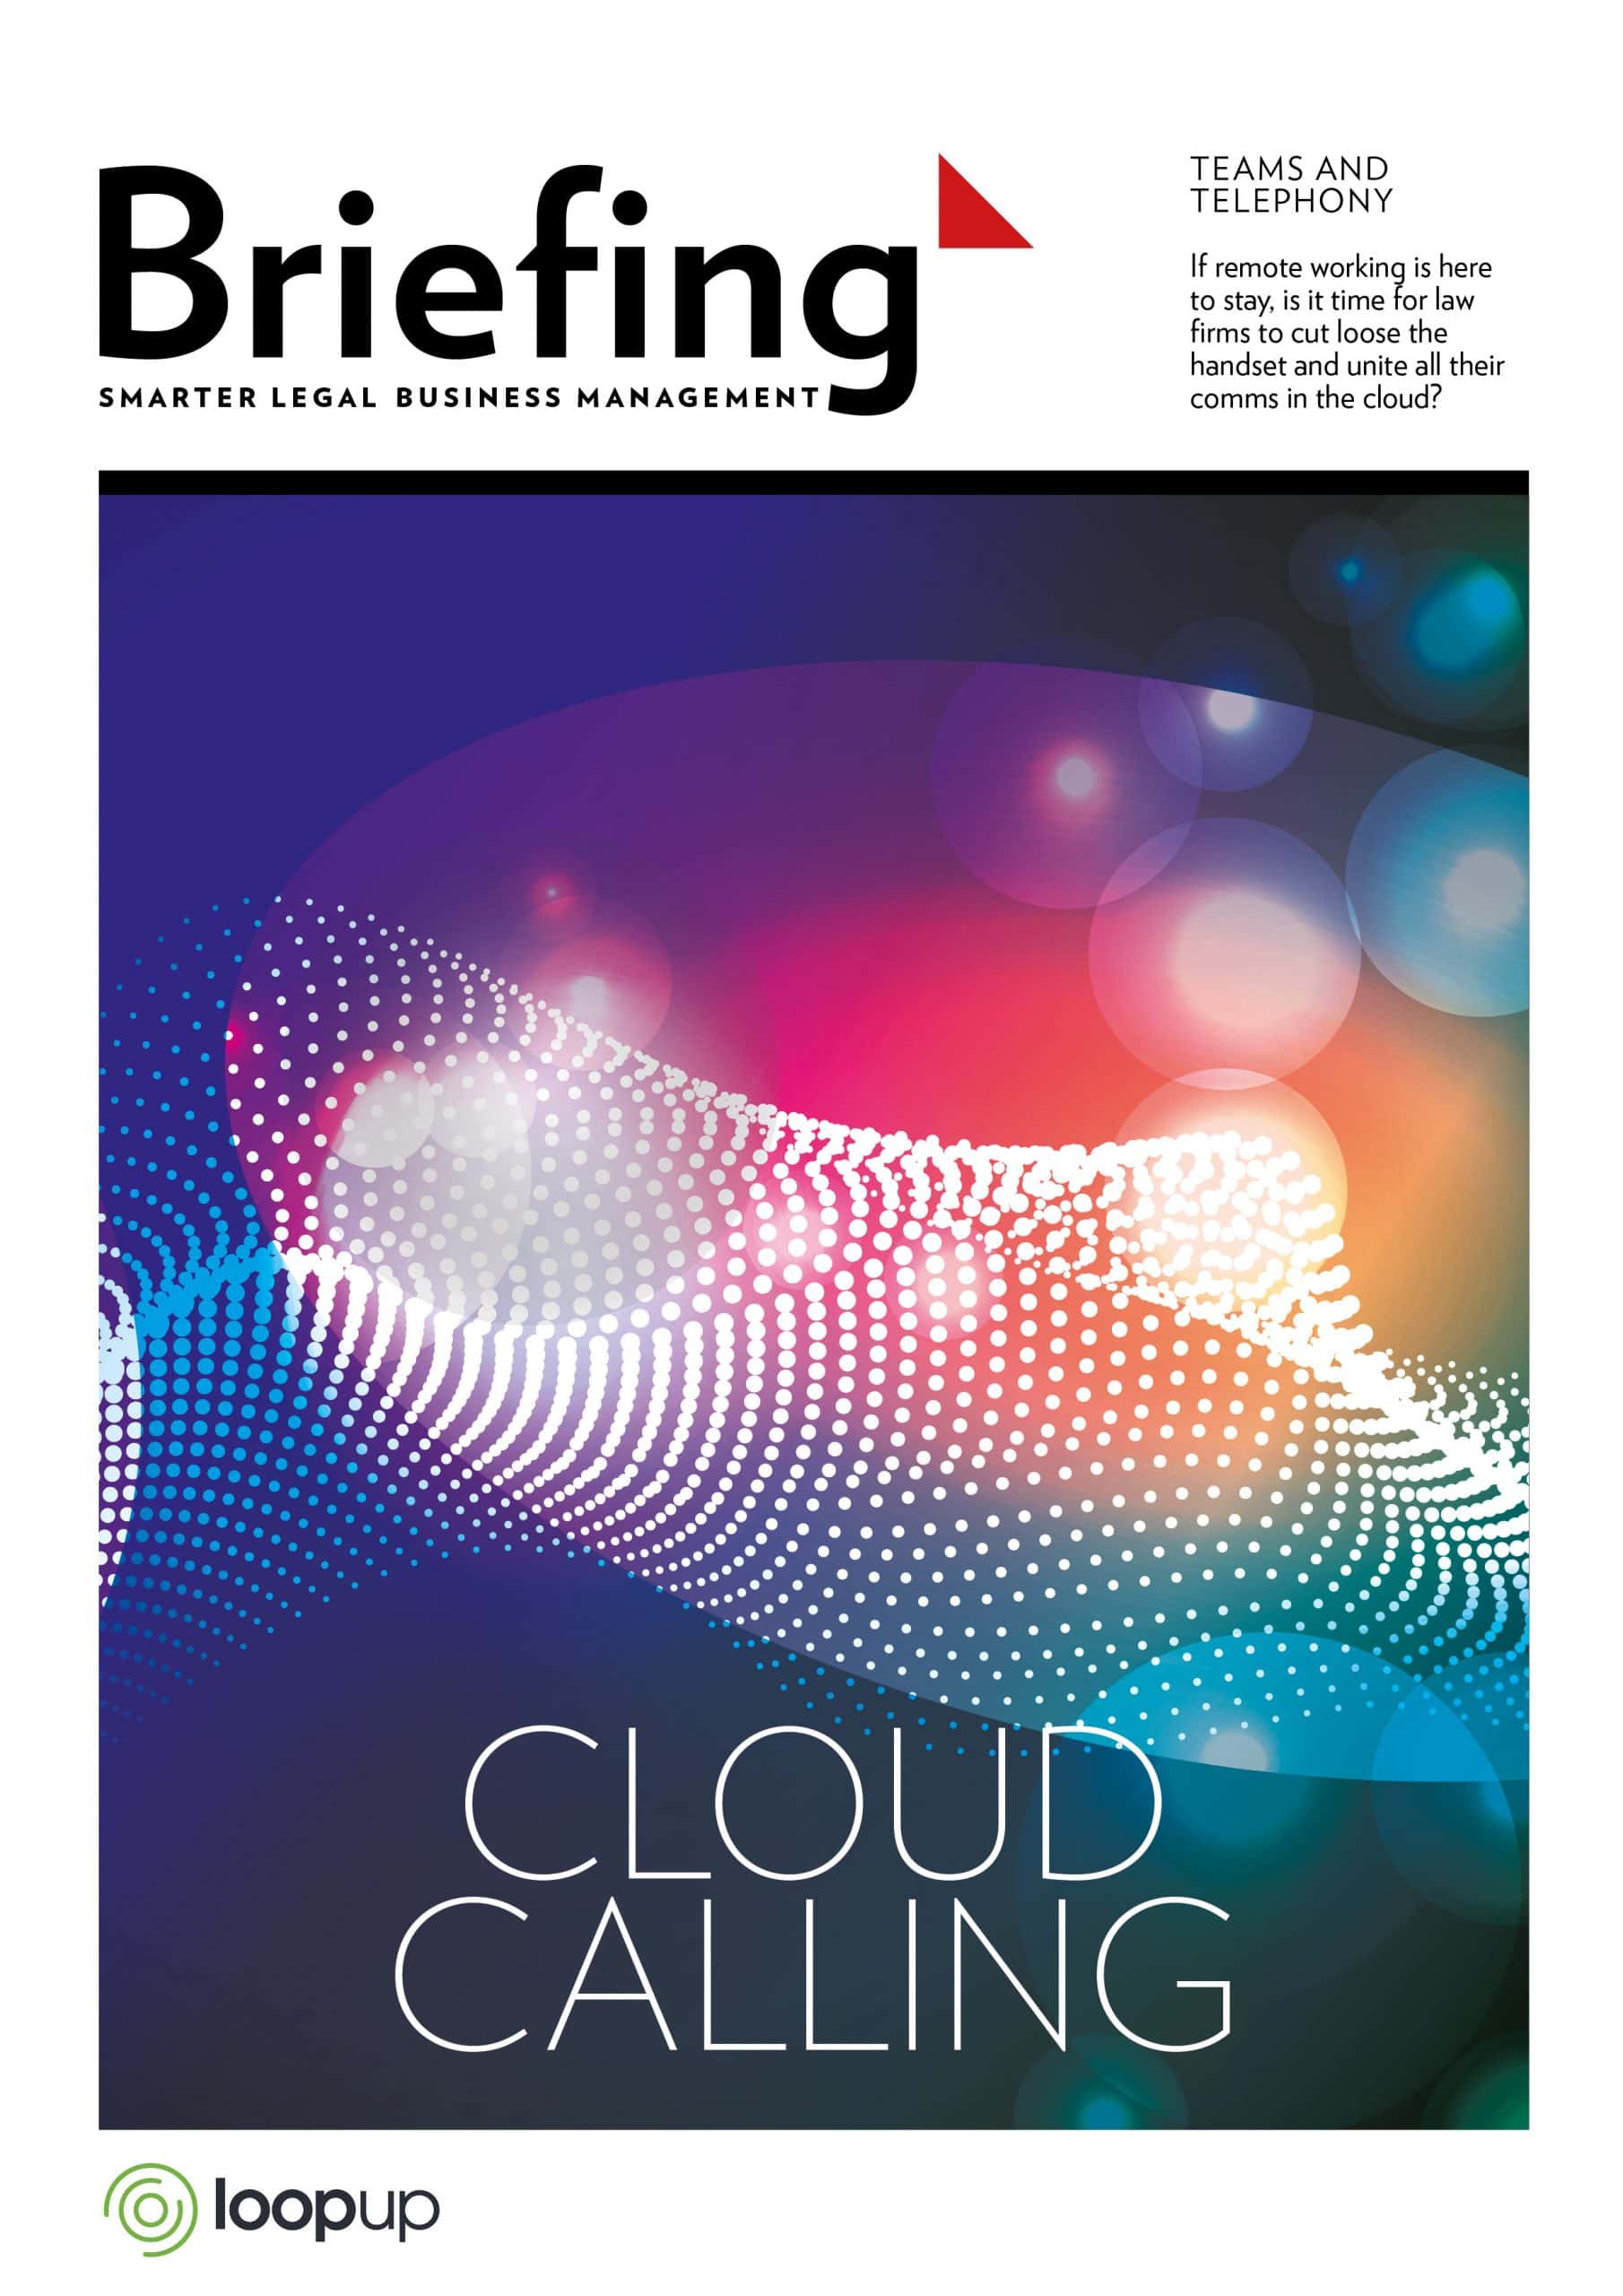 Briefing special report: Cloud calling